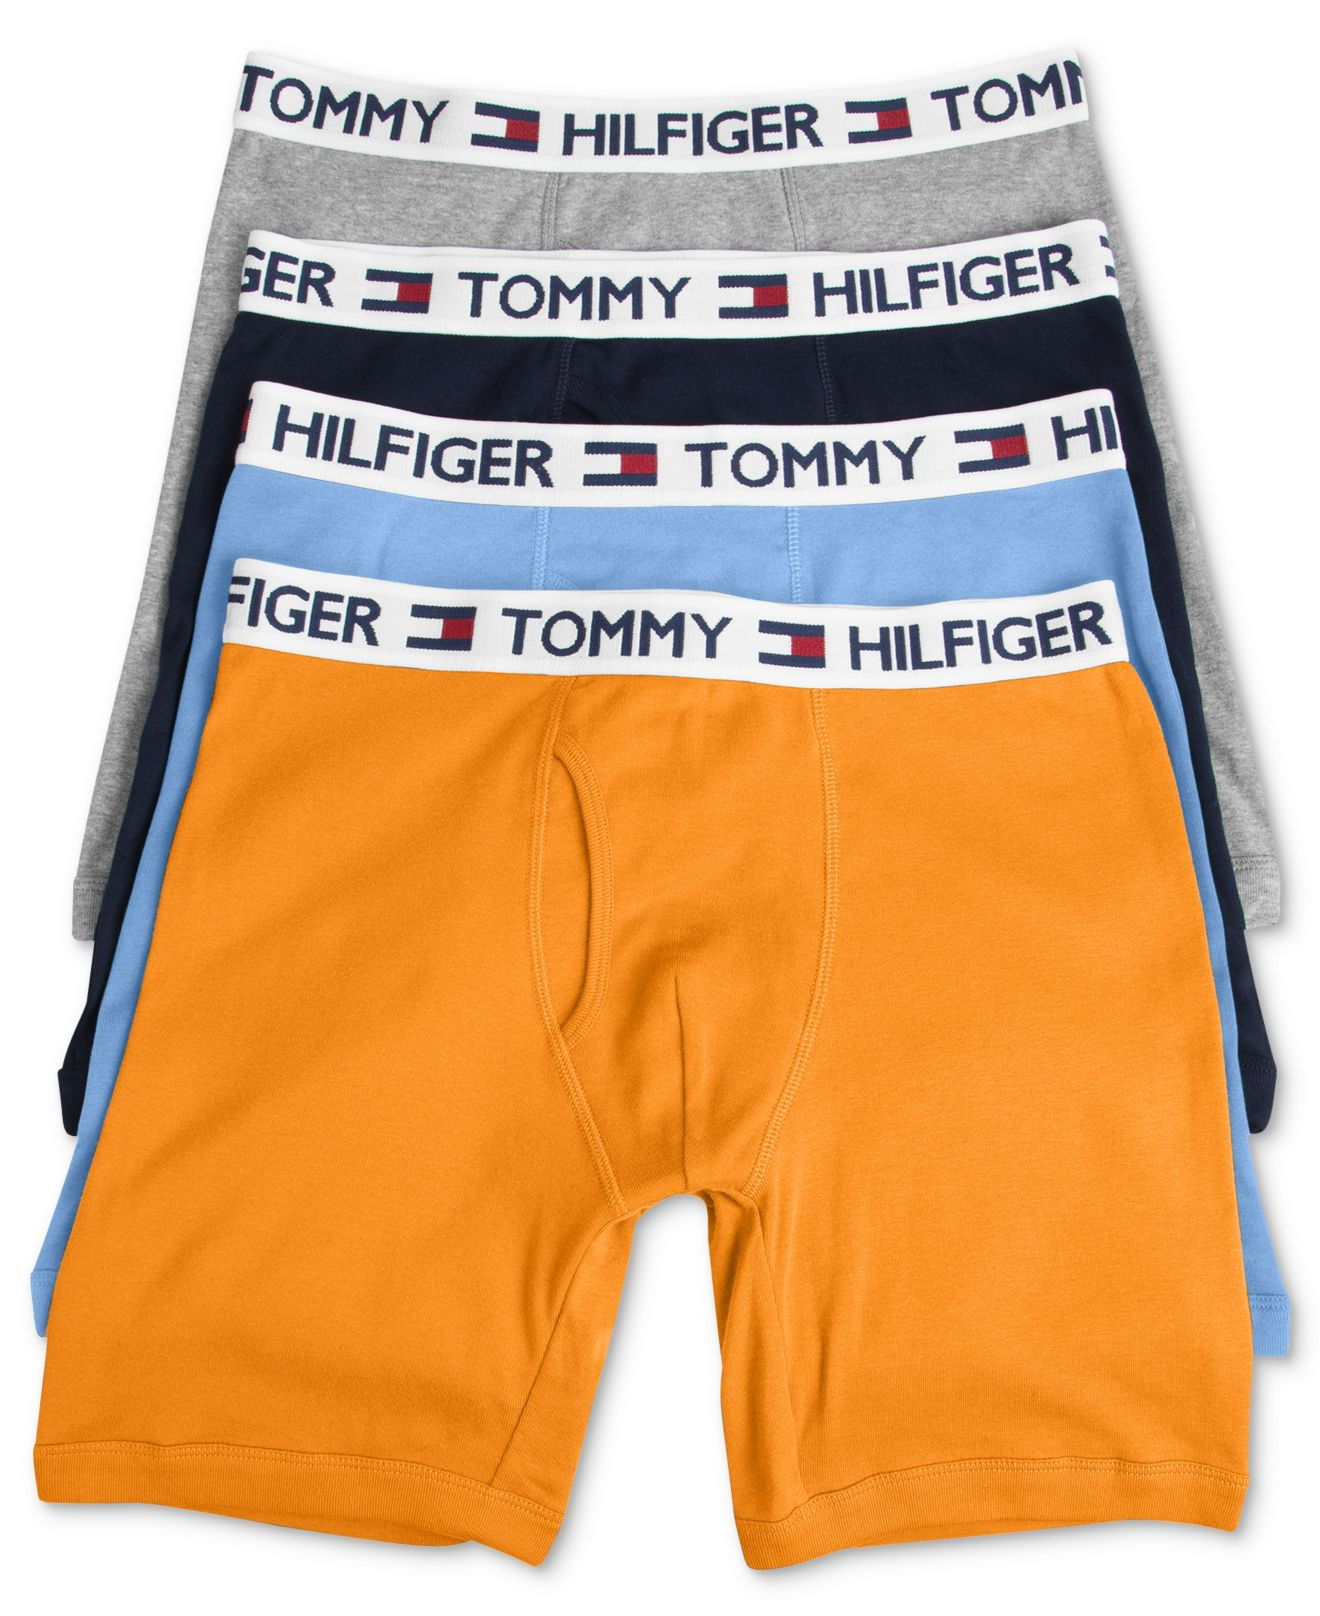 tommy boxer shorts